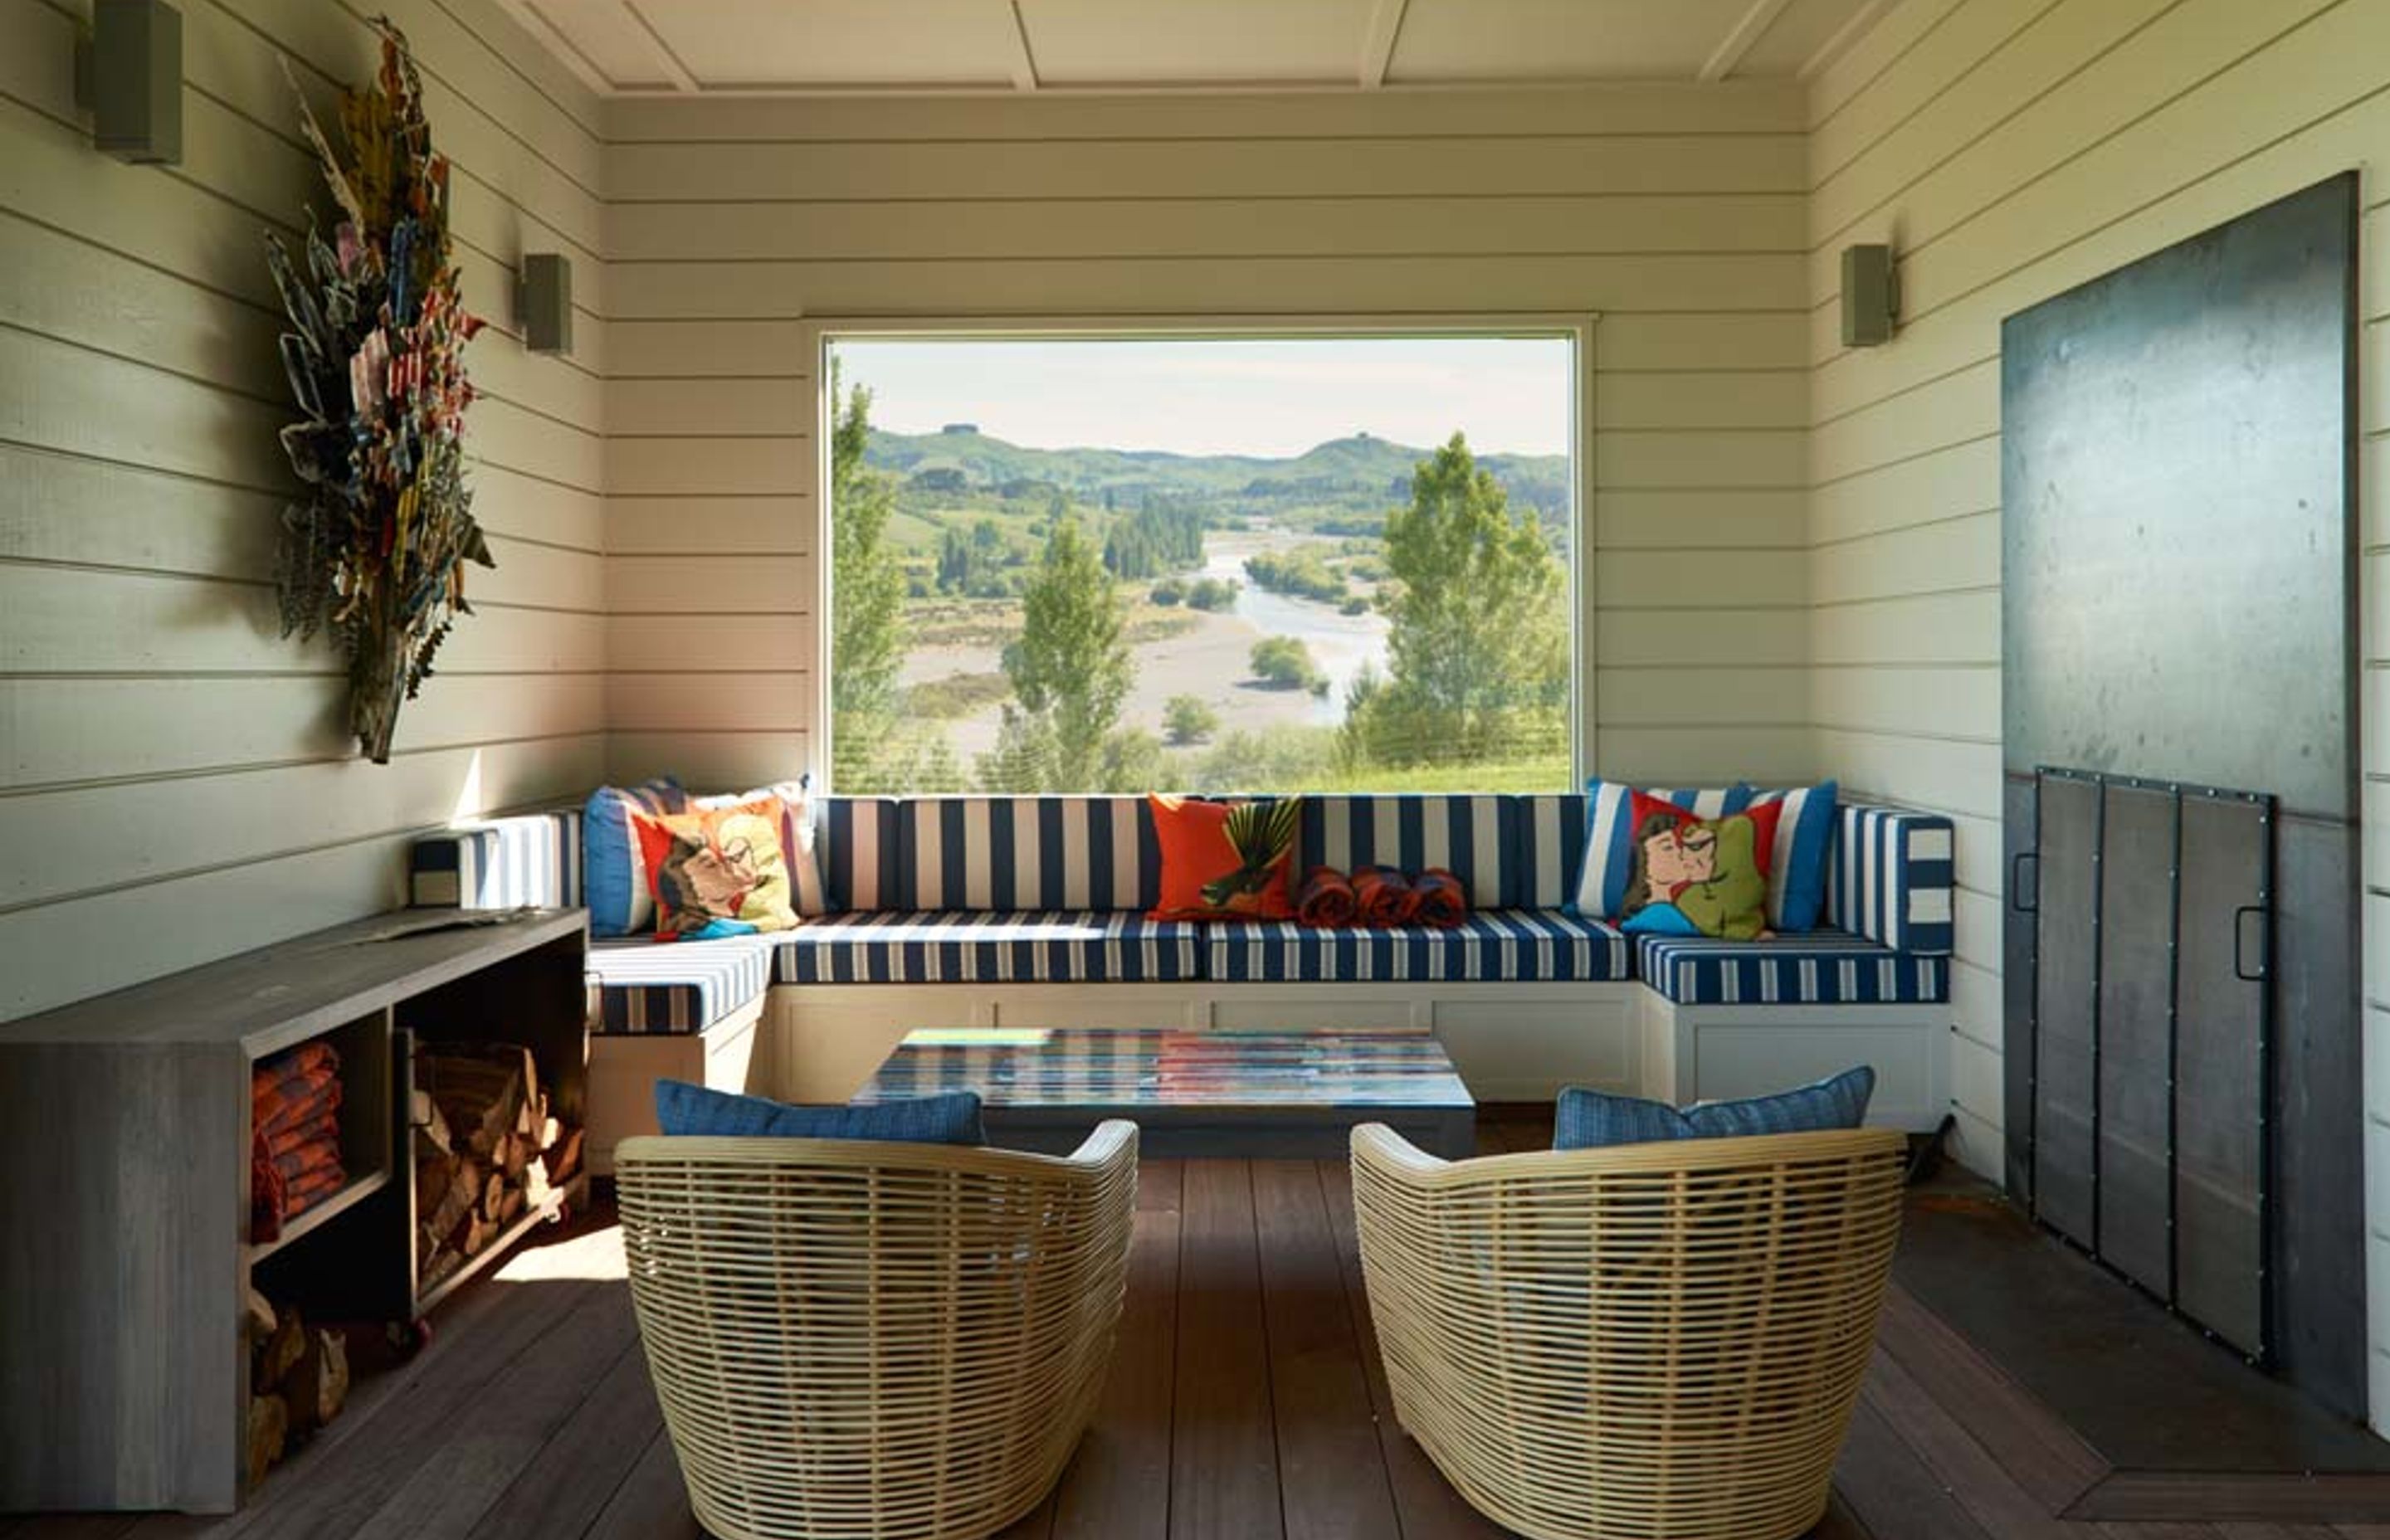 The lounge area in the outdoor room has built-in bench seating, a metal-panelled fireplace and a perfectly framed view of the Tukituki River.